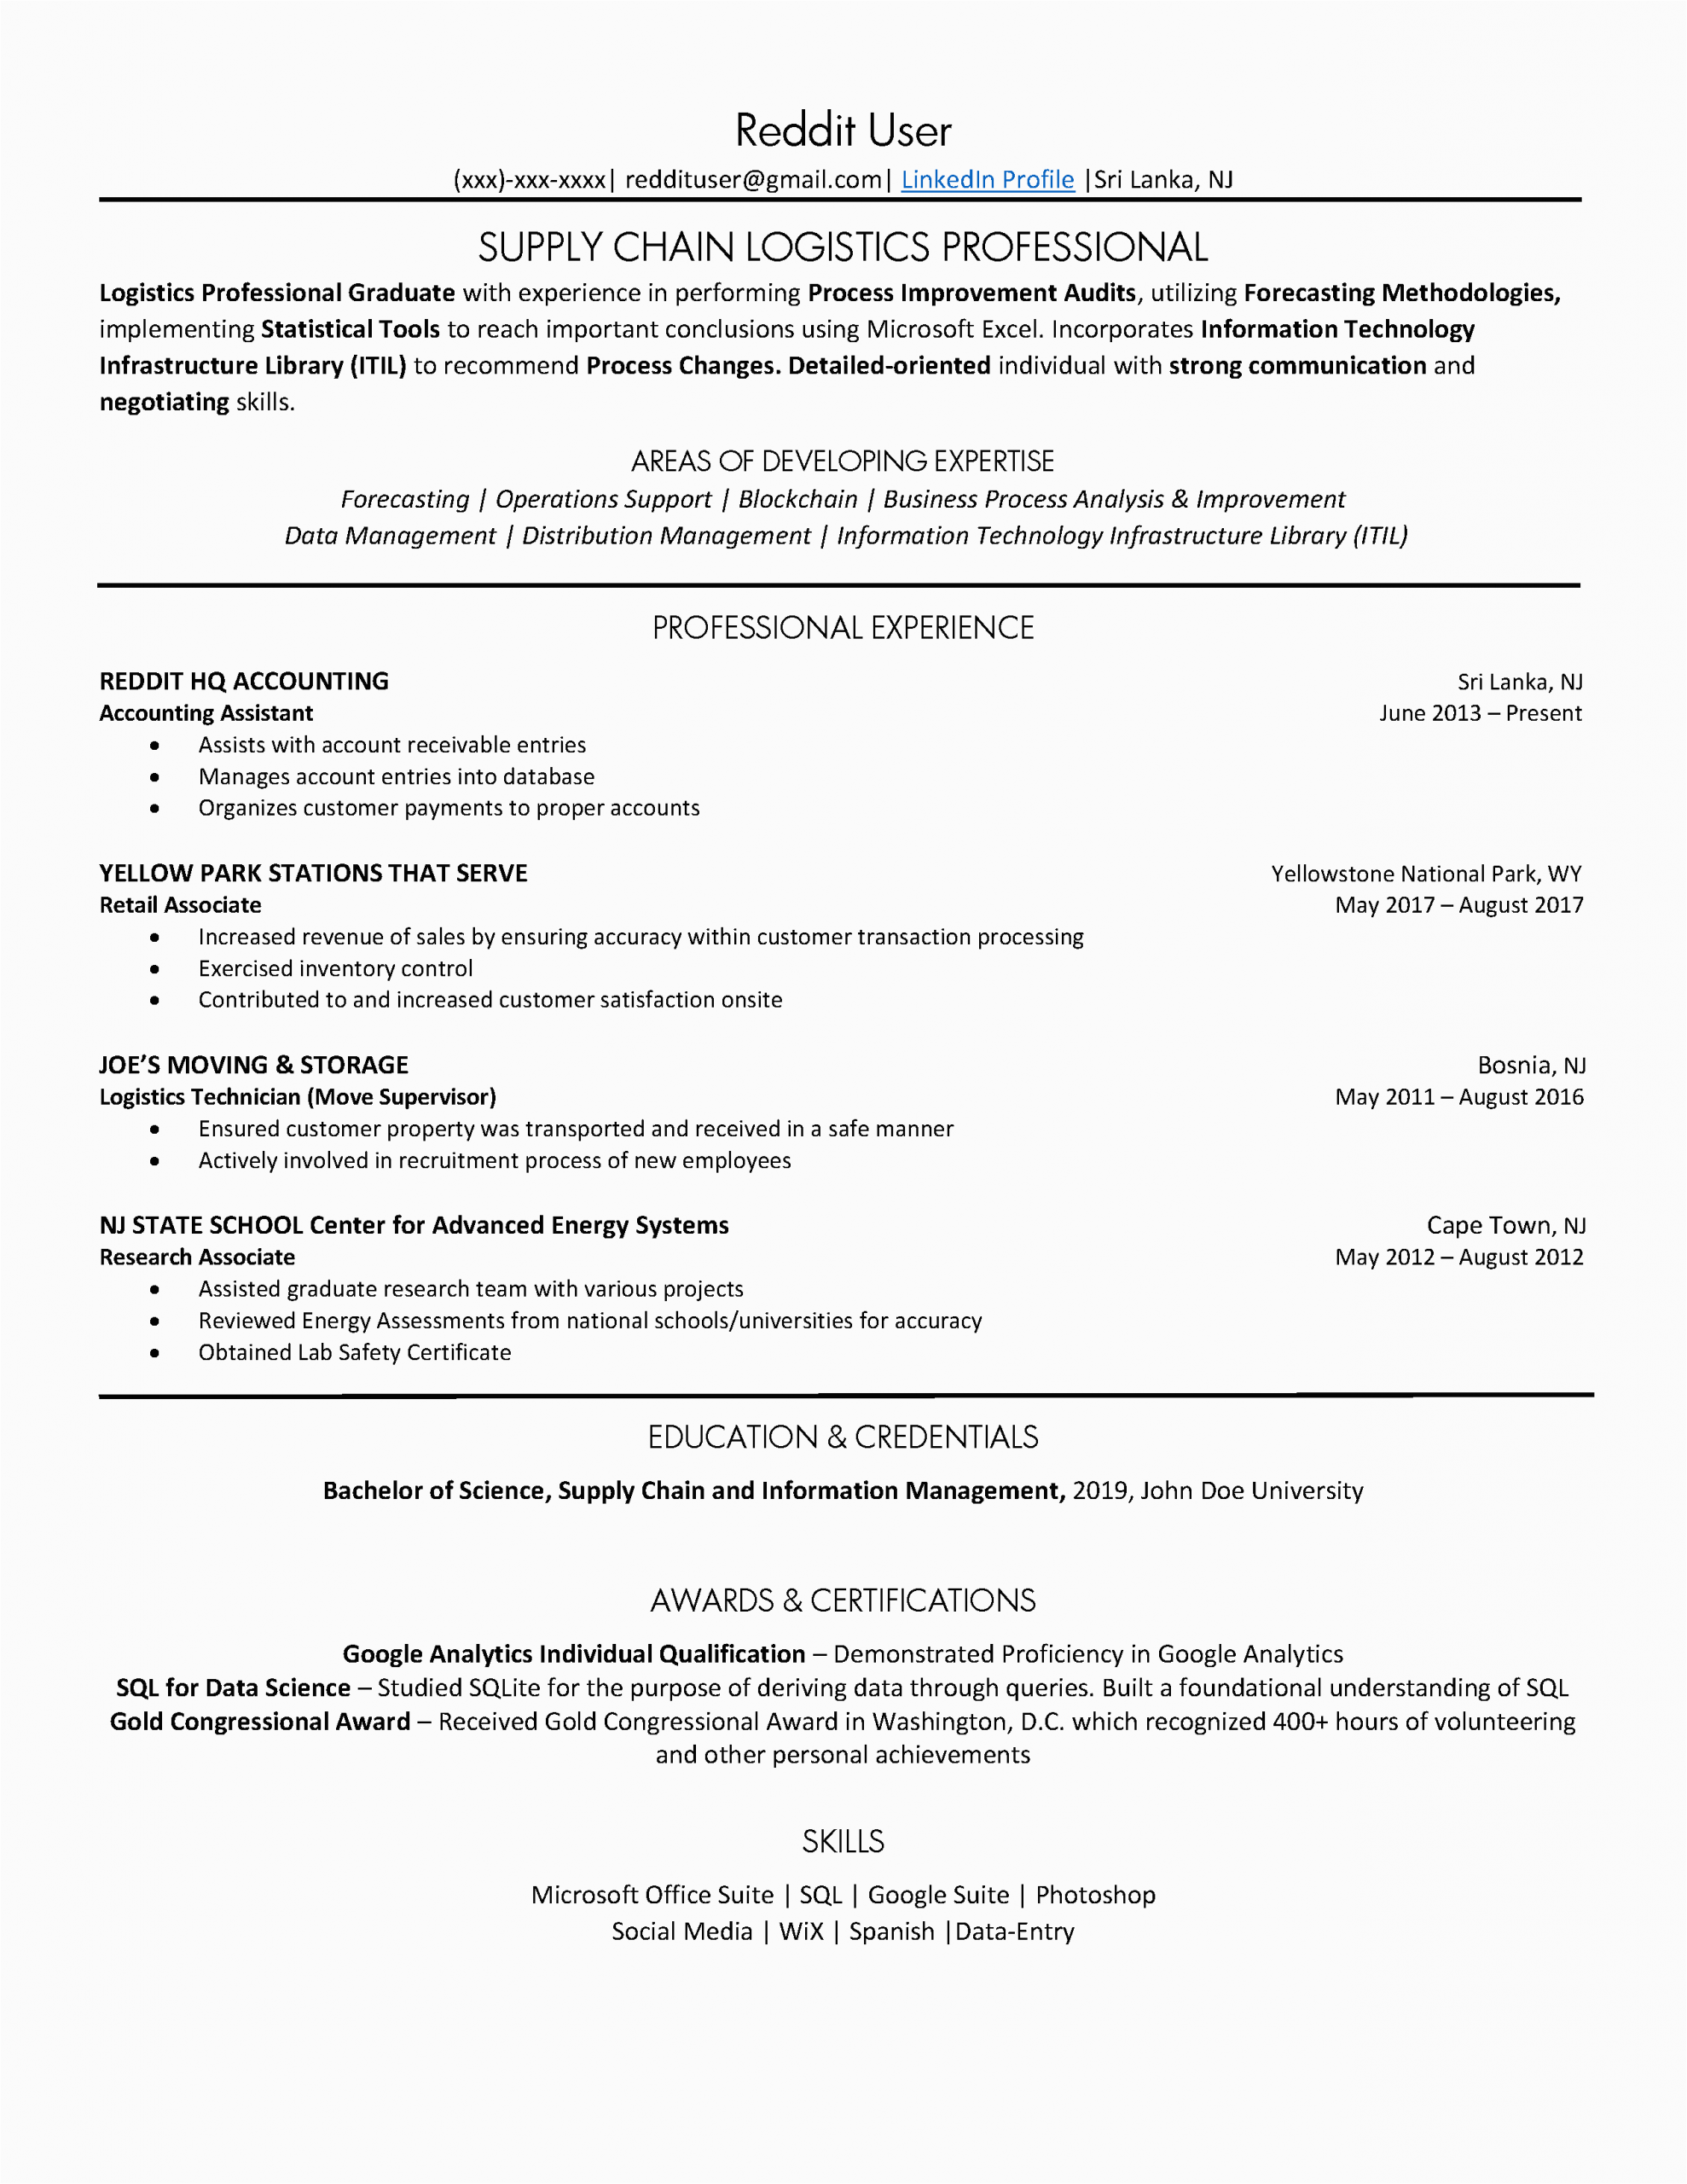 Entry Level Supply Chain Management Resume Sample Recent Grad Applying to Entry Level Supply Chain Jobs Help Pls